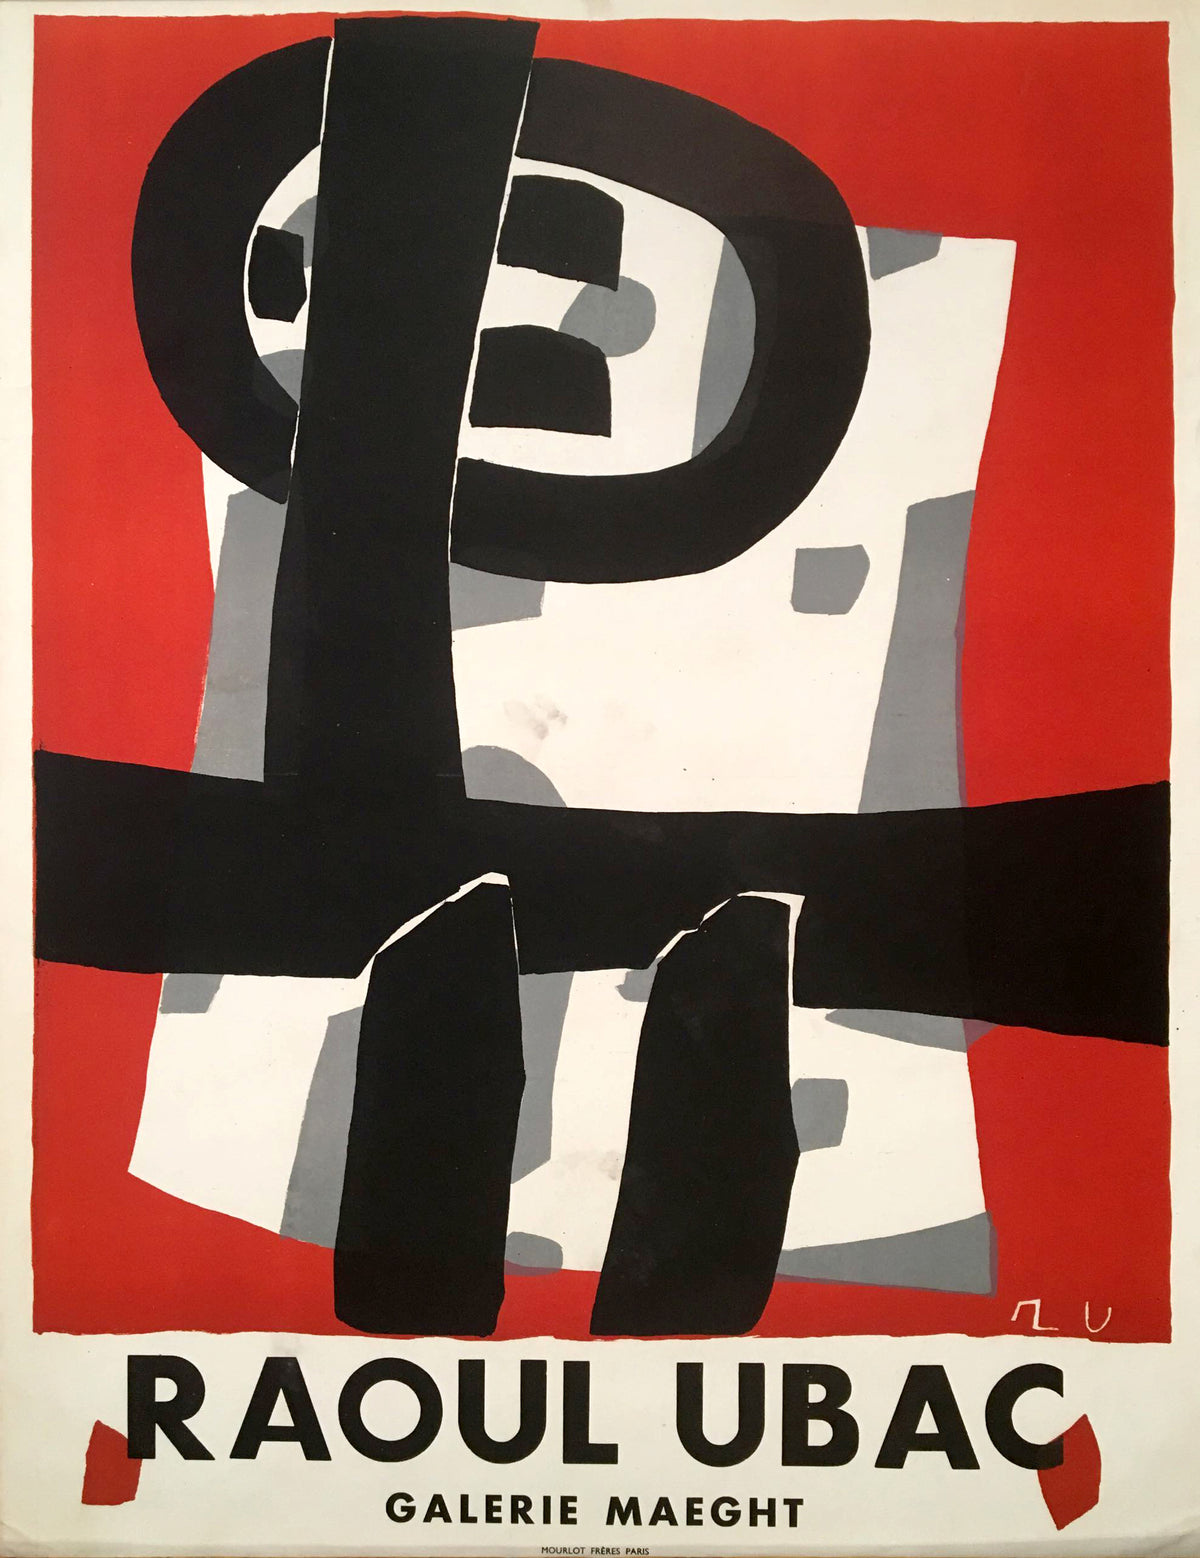 Raoul Ubac- Galerie Maeght - Authentic Vintage Poster